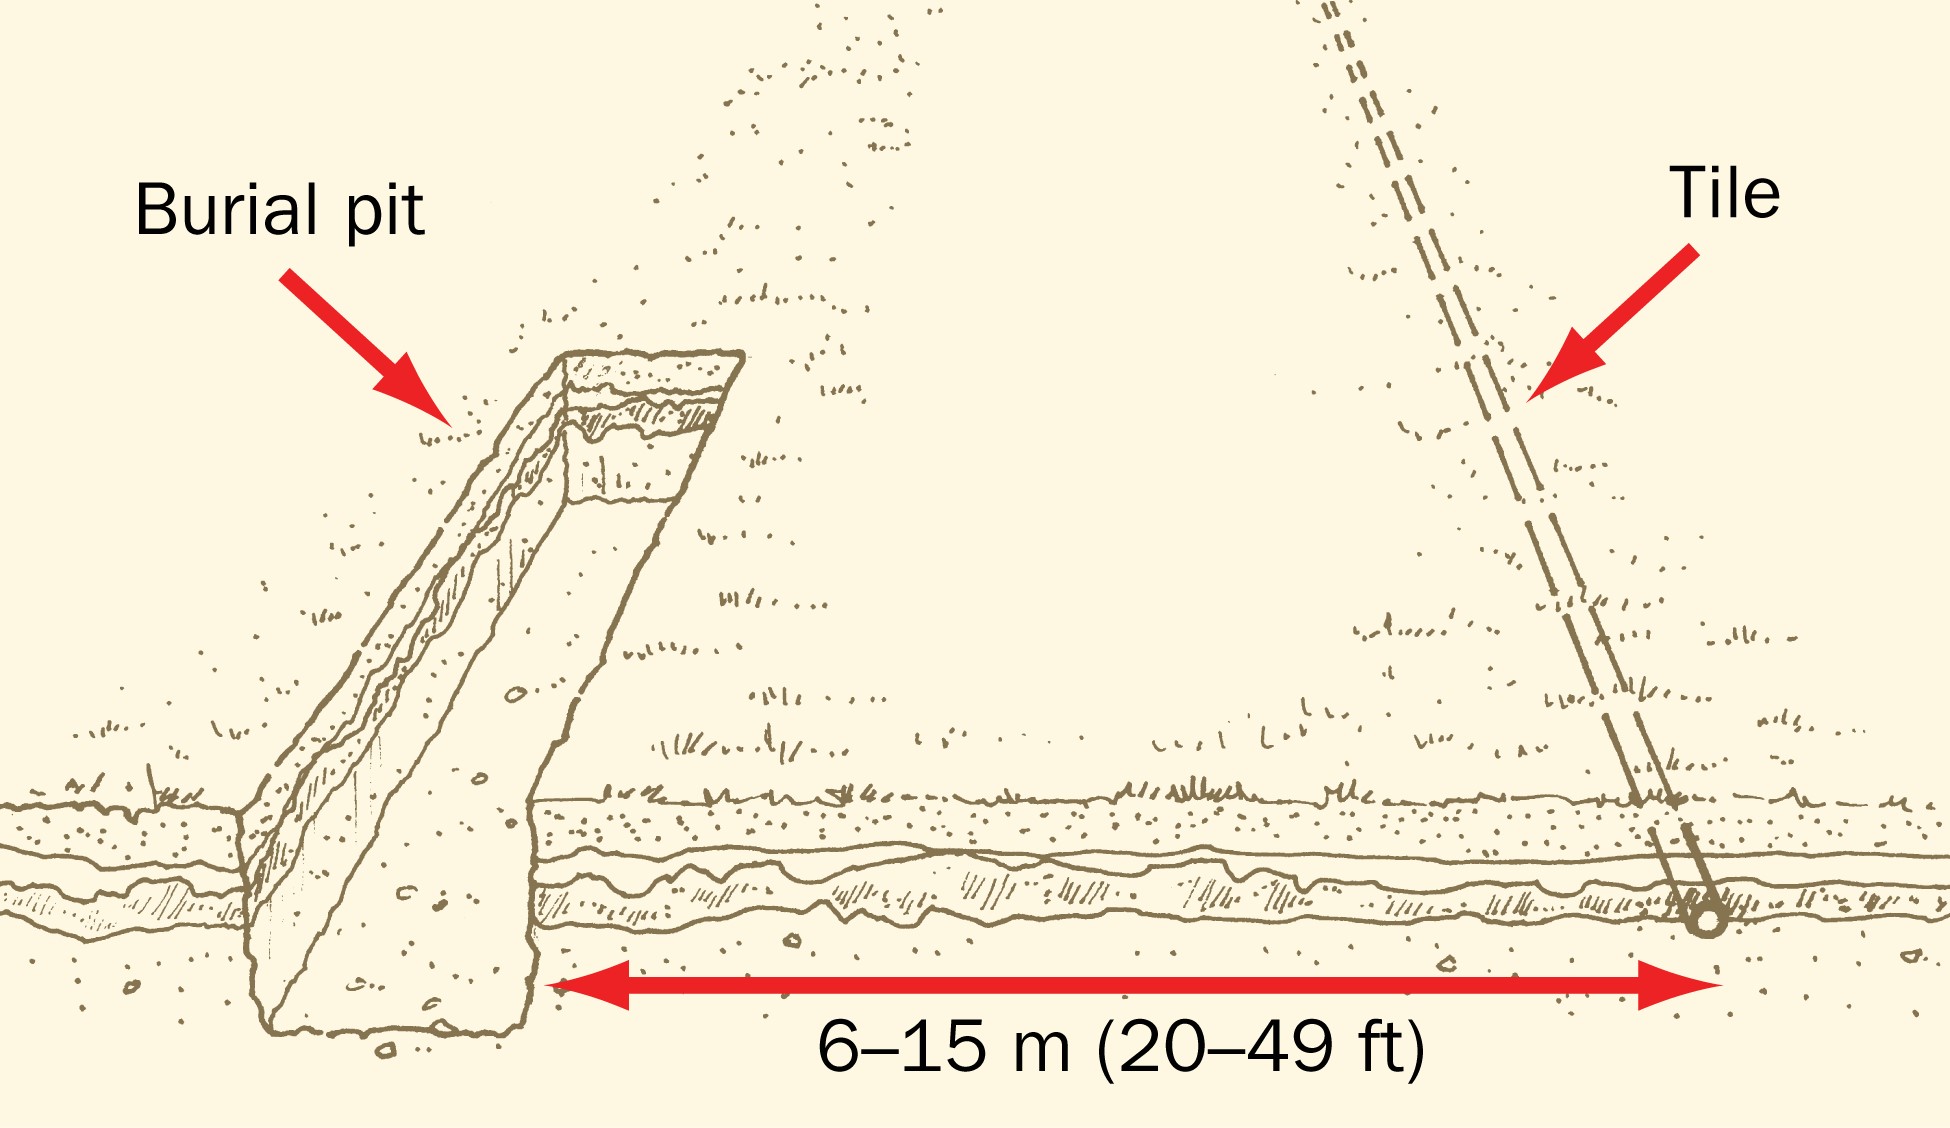 This is an artist’s rendition showing the relative location of a field drainage tile in relation to a burial pit and how every part of that burial pit must be at least 6m (19.7 ft.) from a field drainage tile and in the zone between 6 metres and 15 metres (49.2 feet) from a tile, deadstock must be placed so the highest point of the uppermost deadstock is lower than the lowest point.